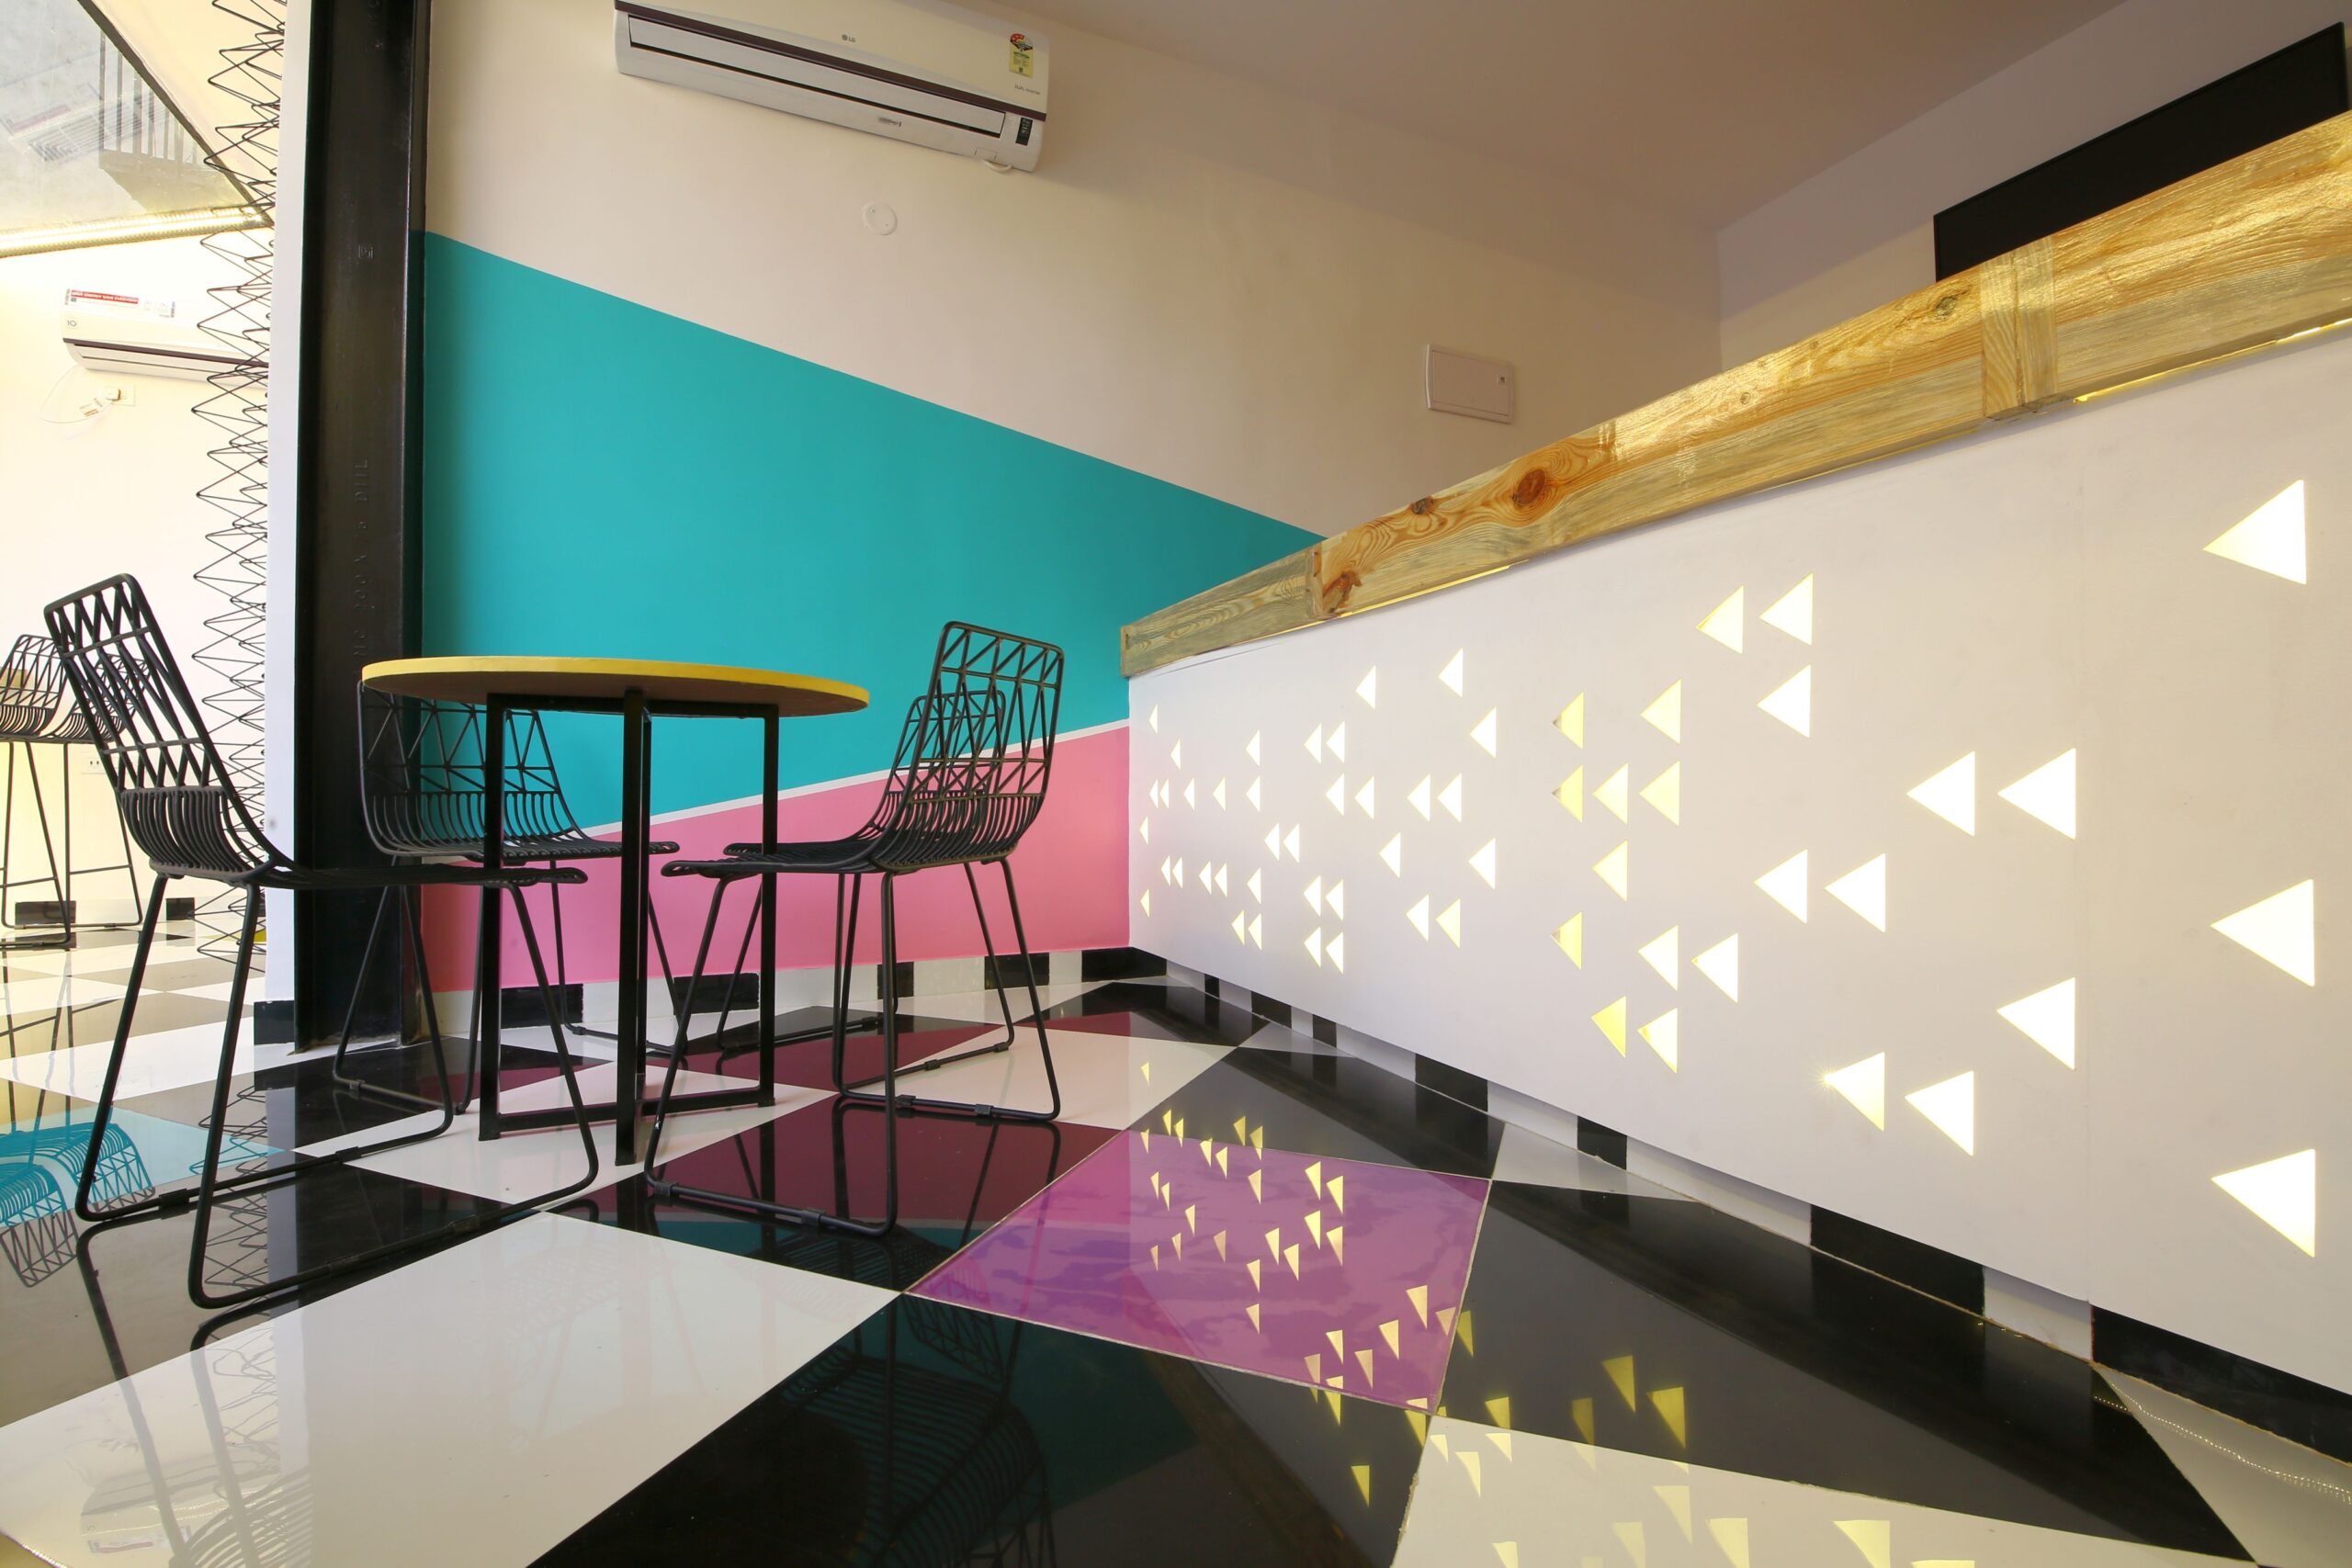 Rewind (Melting Moments), an ice cream parlour, in Hyderabad, by DesignAware 57